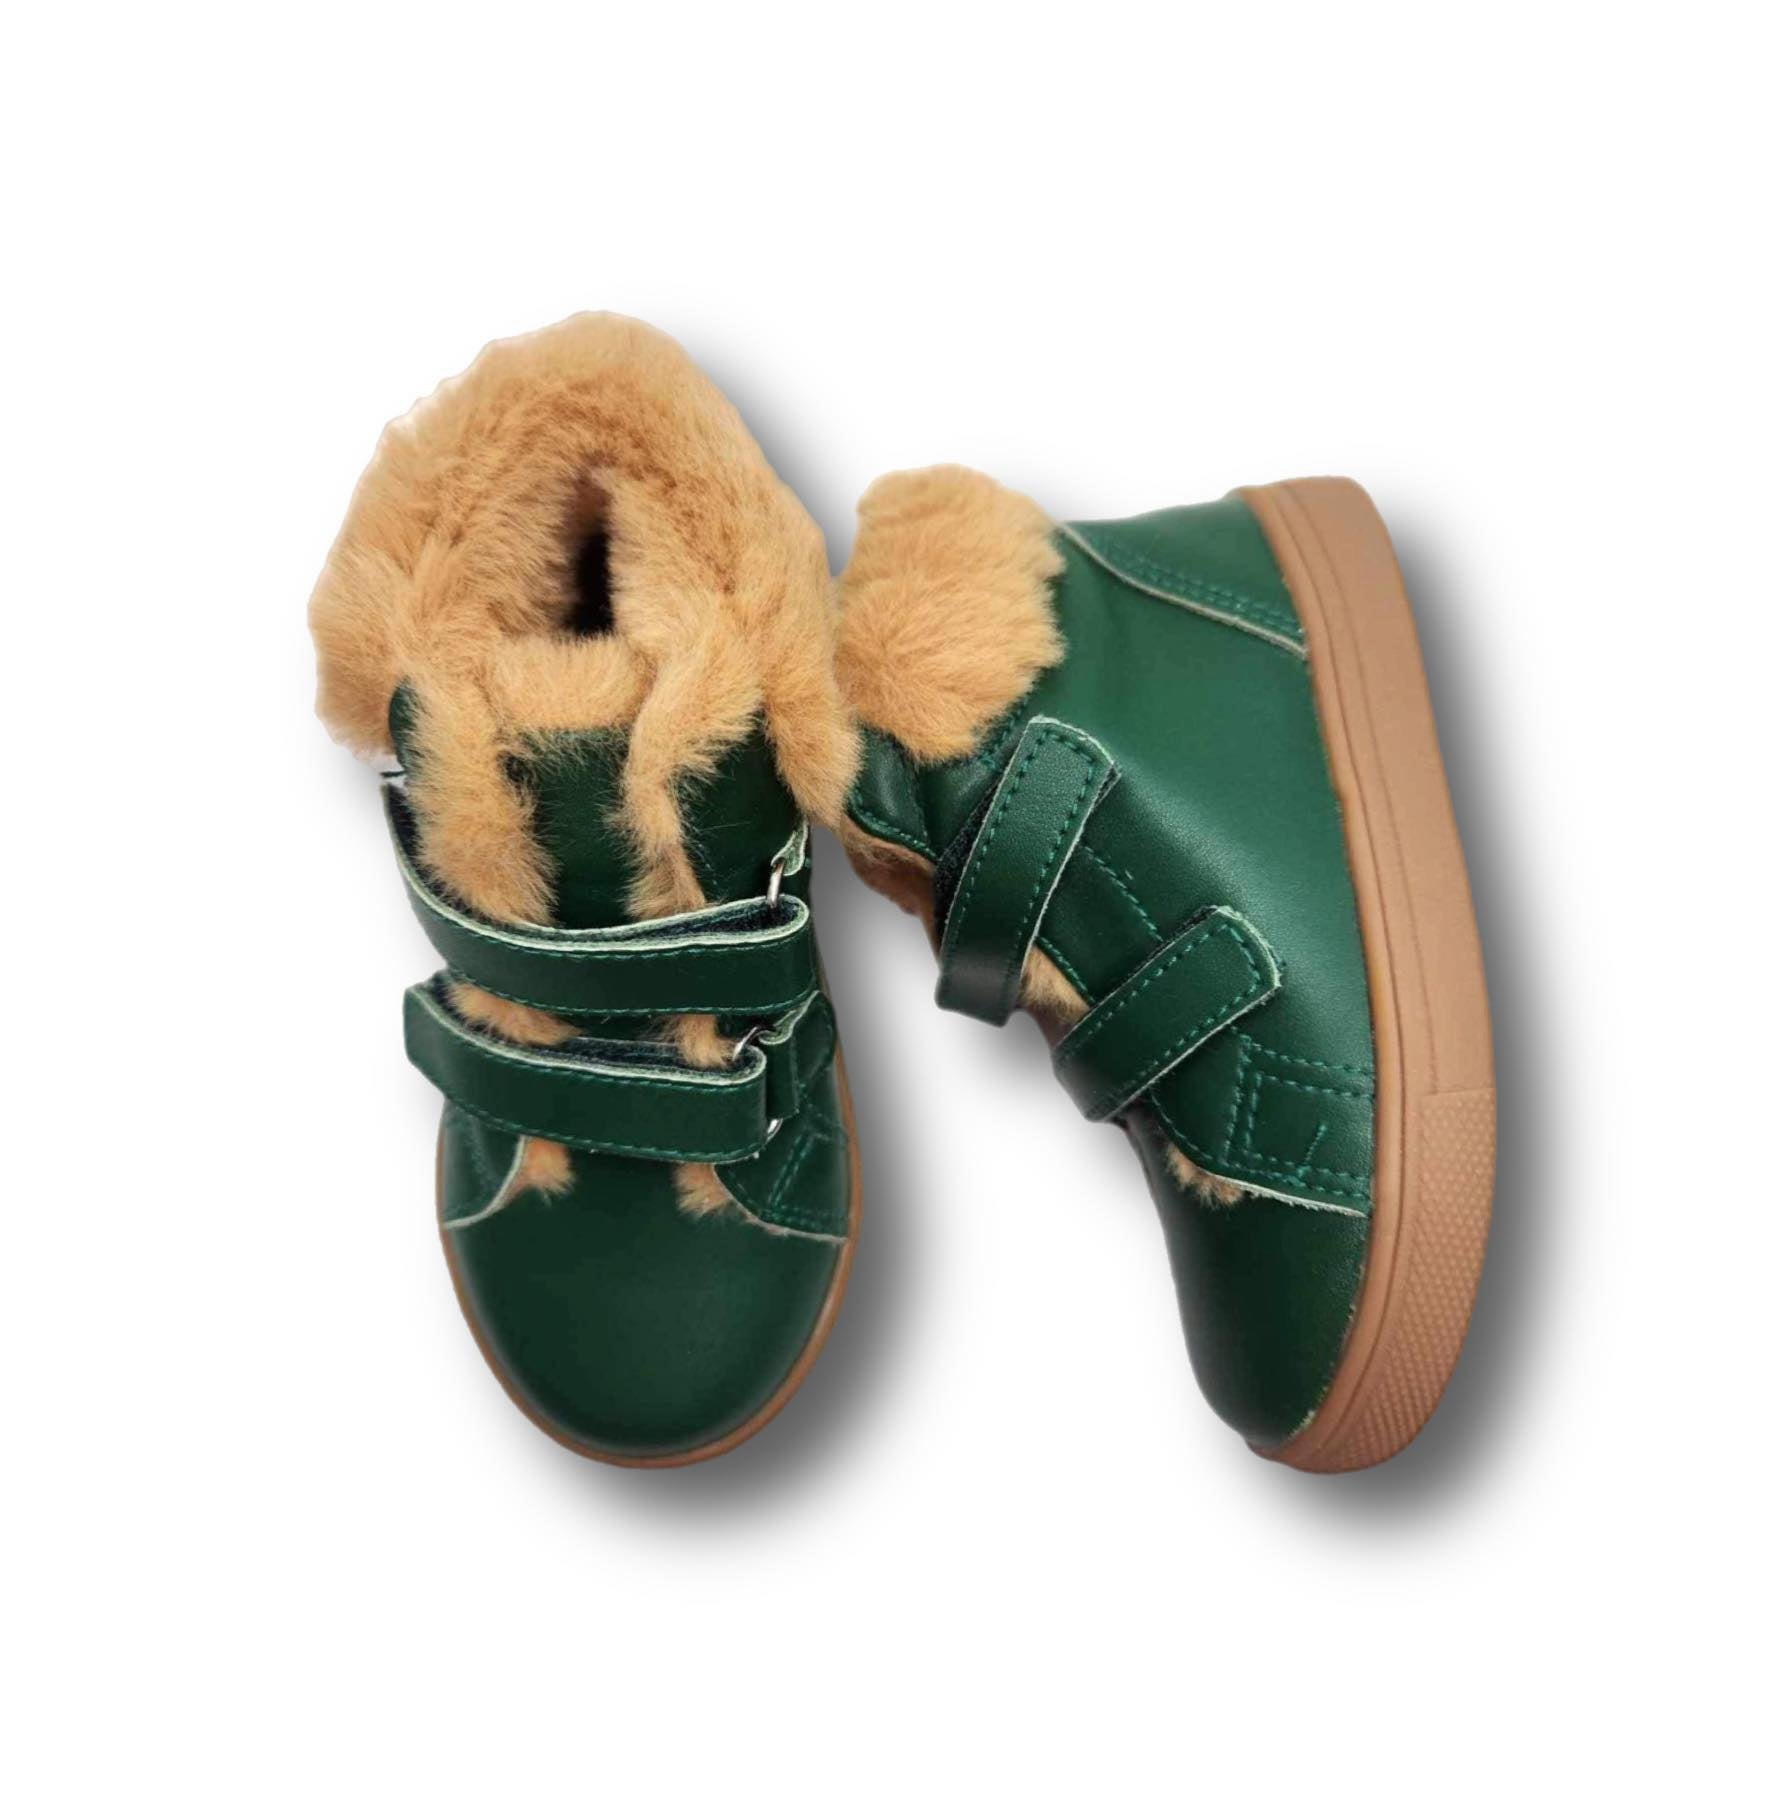 DOMINIC Children's Boot in Winter Green Leather